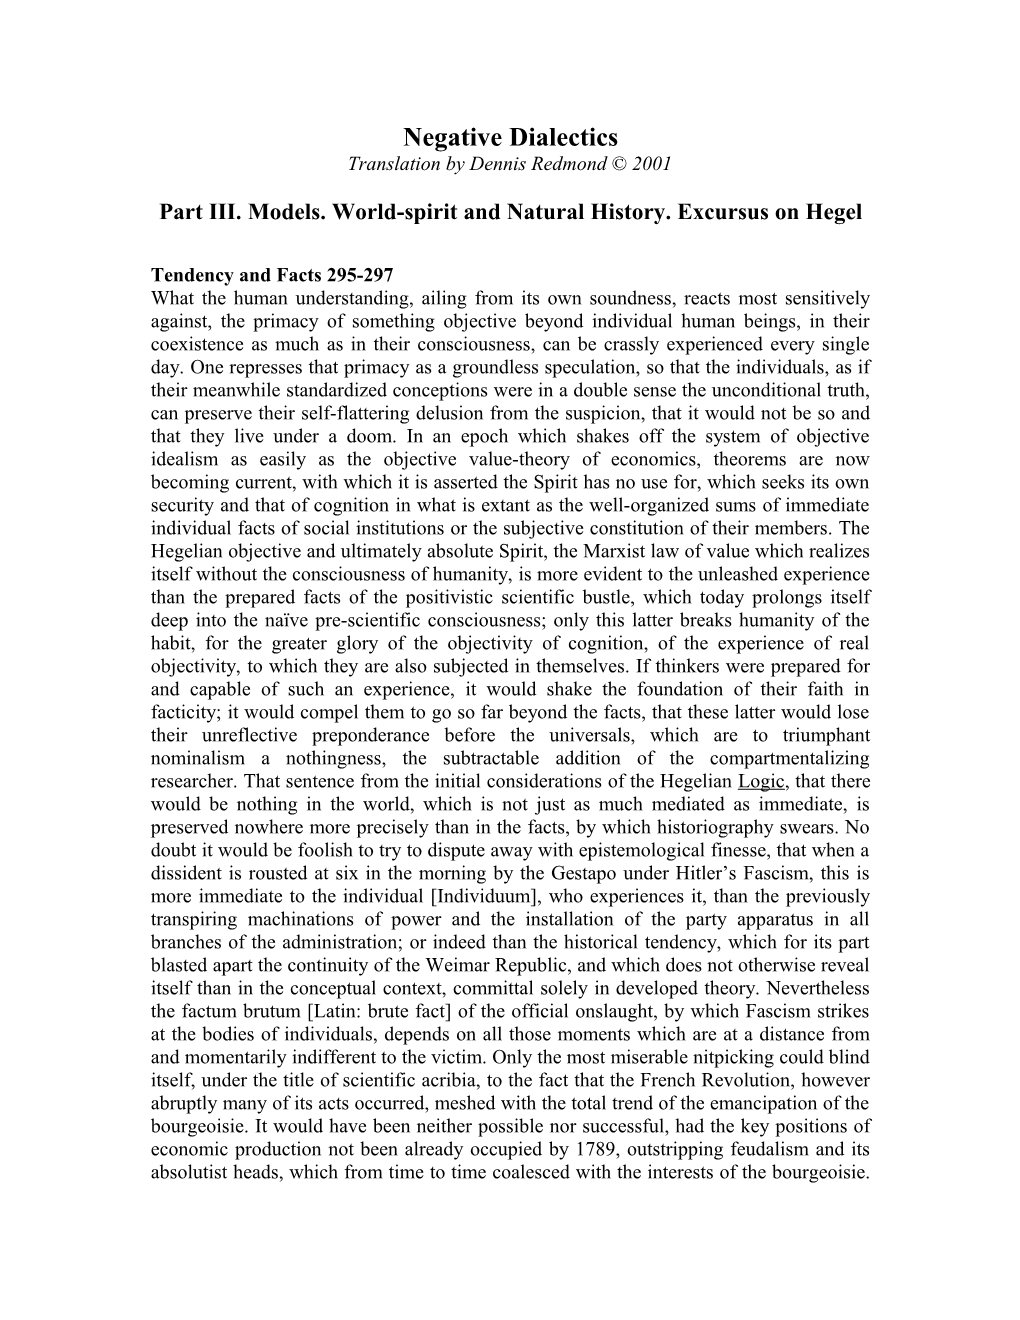 Part III. Models. World-Spirit and Natural History. Excursus on Hegel